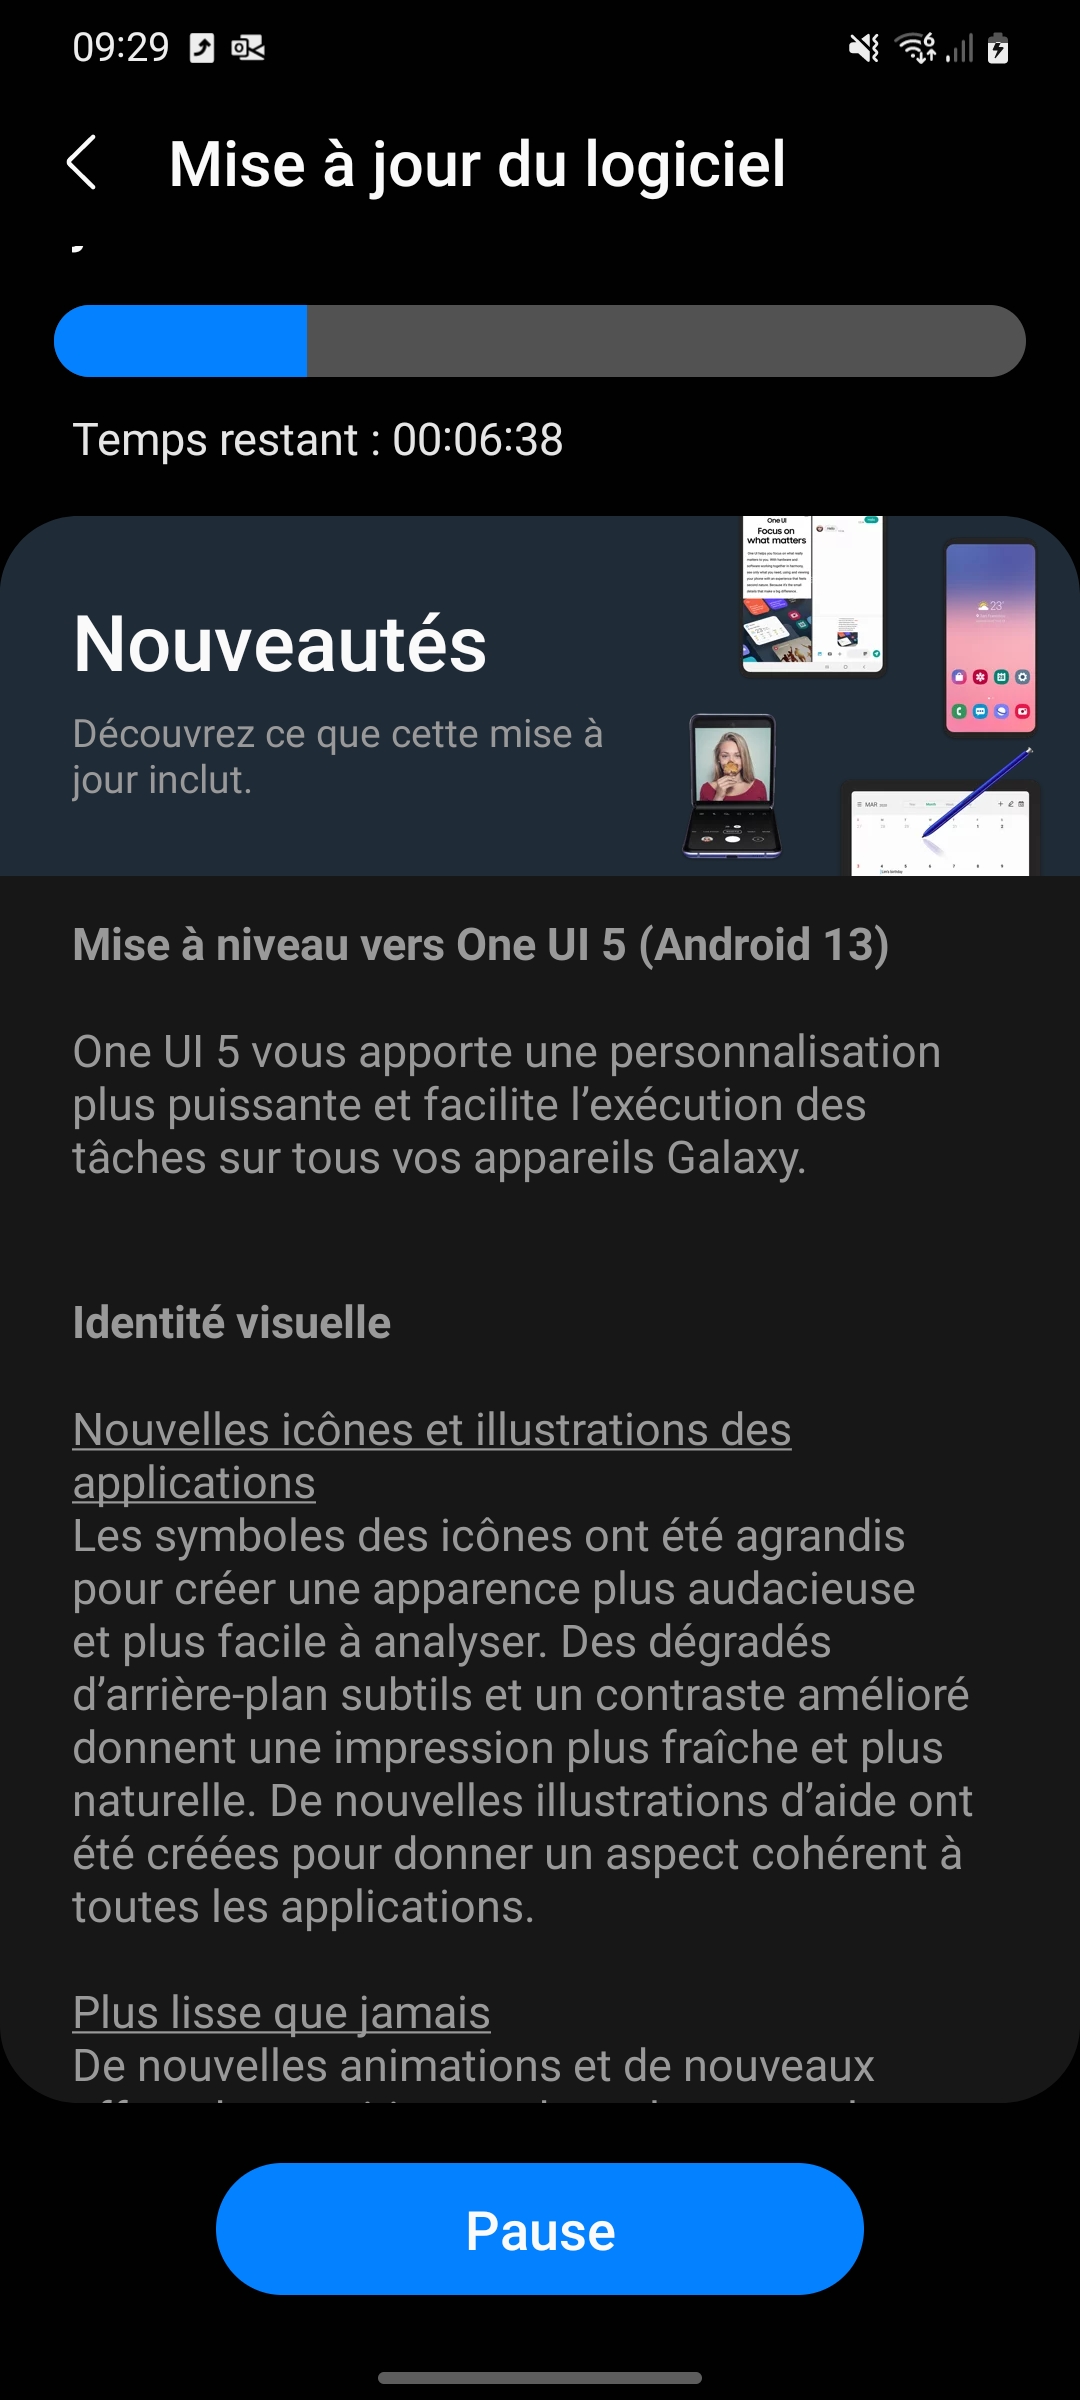 Android 13 / OneUi 5.0 - Samsung Community